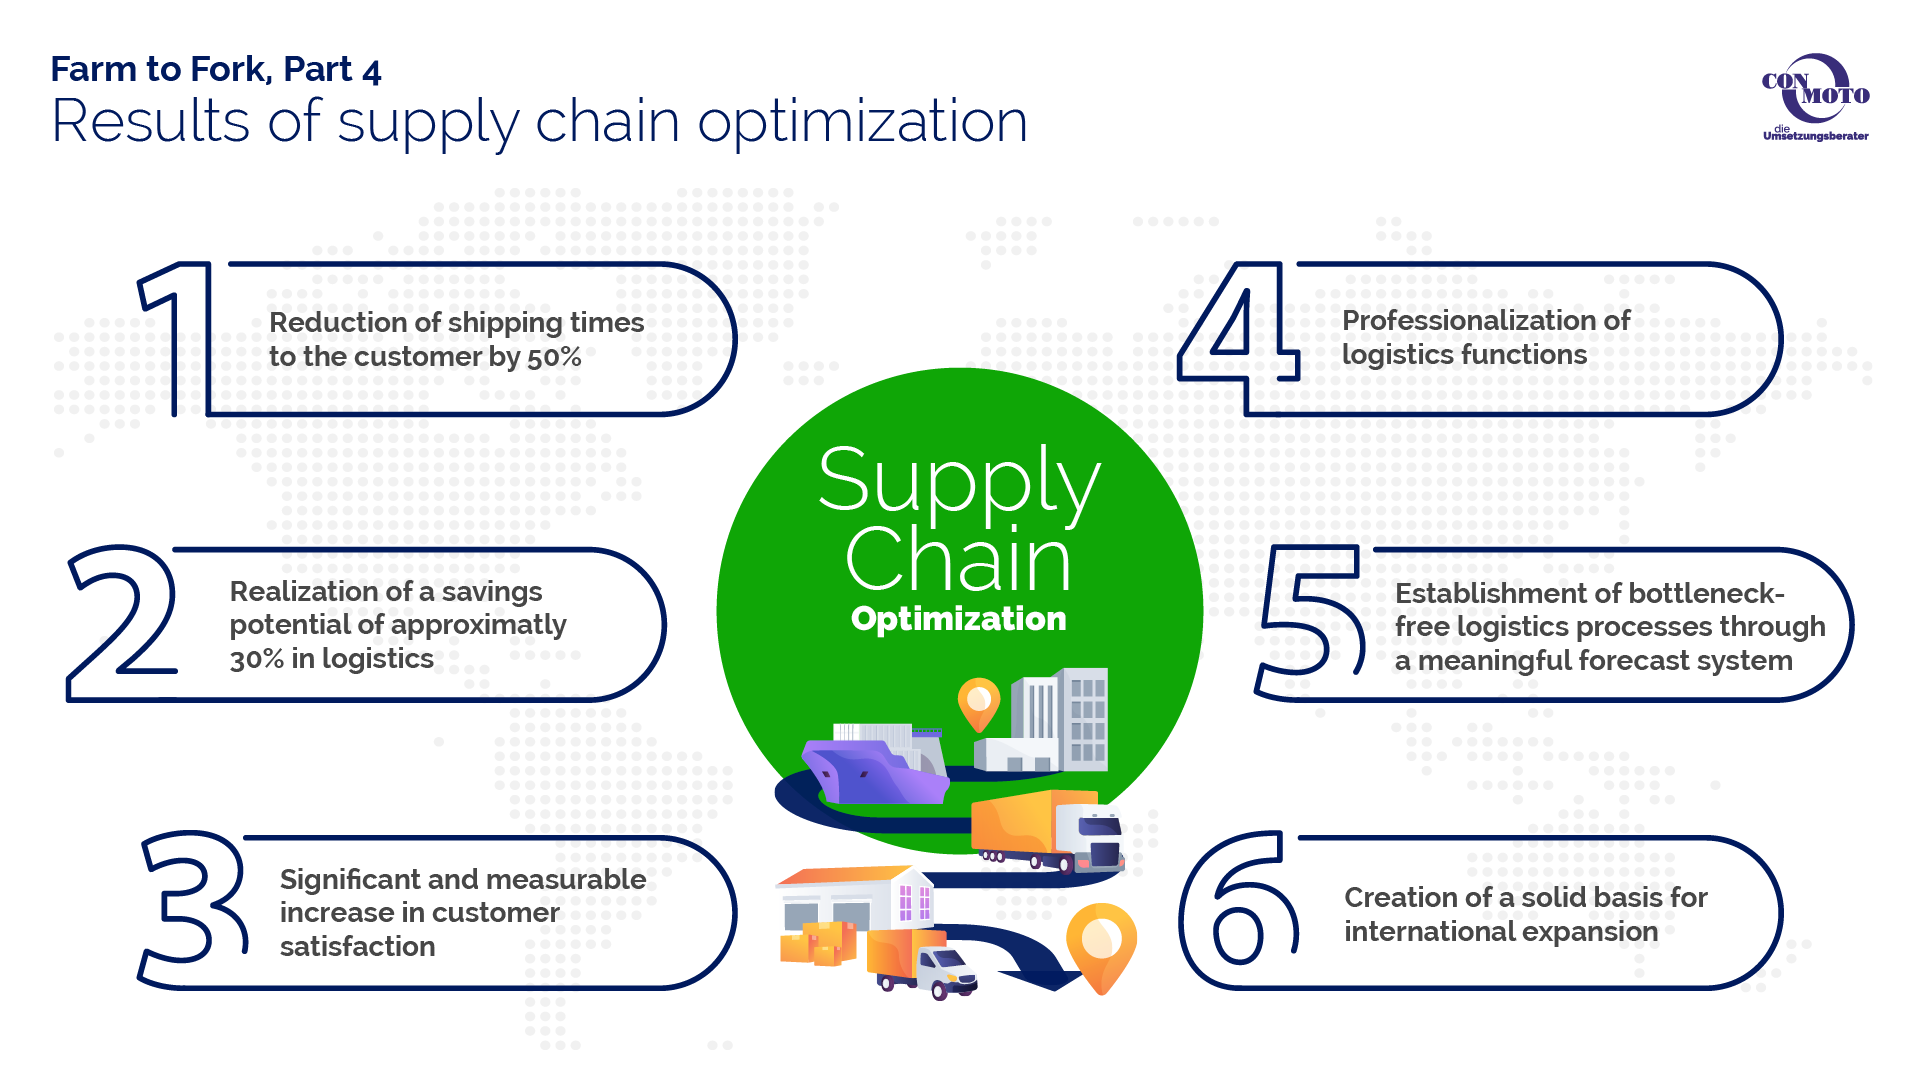 Results of the supply chain optimization